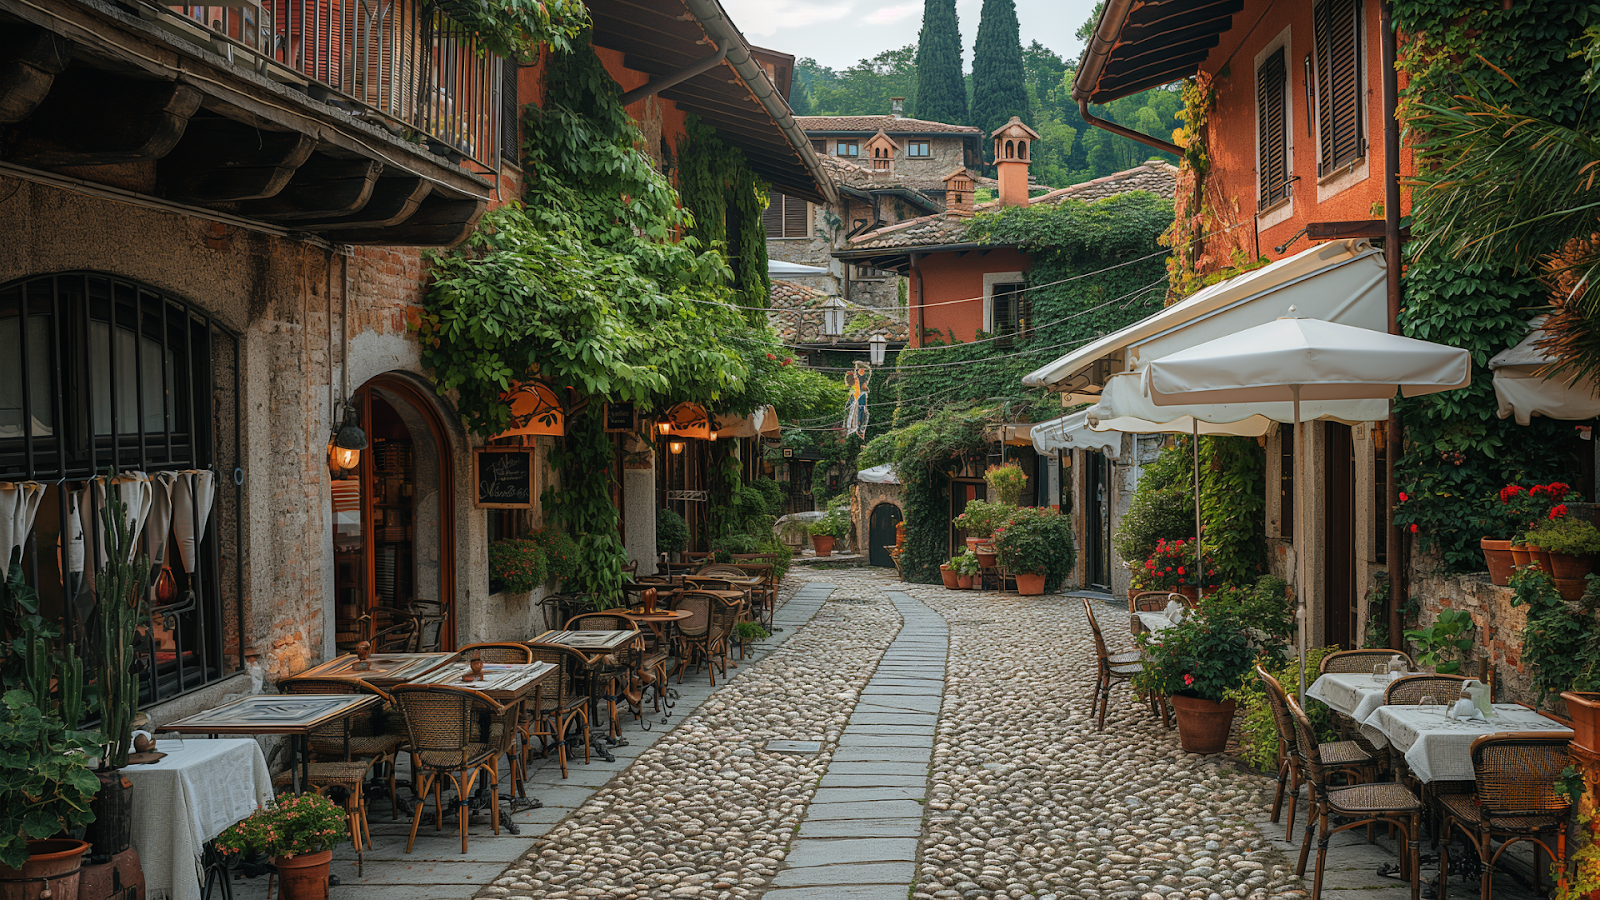 Cozy Italian osteria in a medieval town, featuring outdoor dining and walls adorned with ivy.